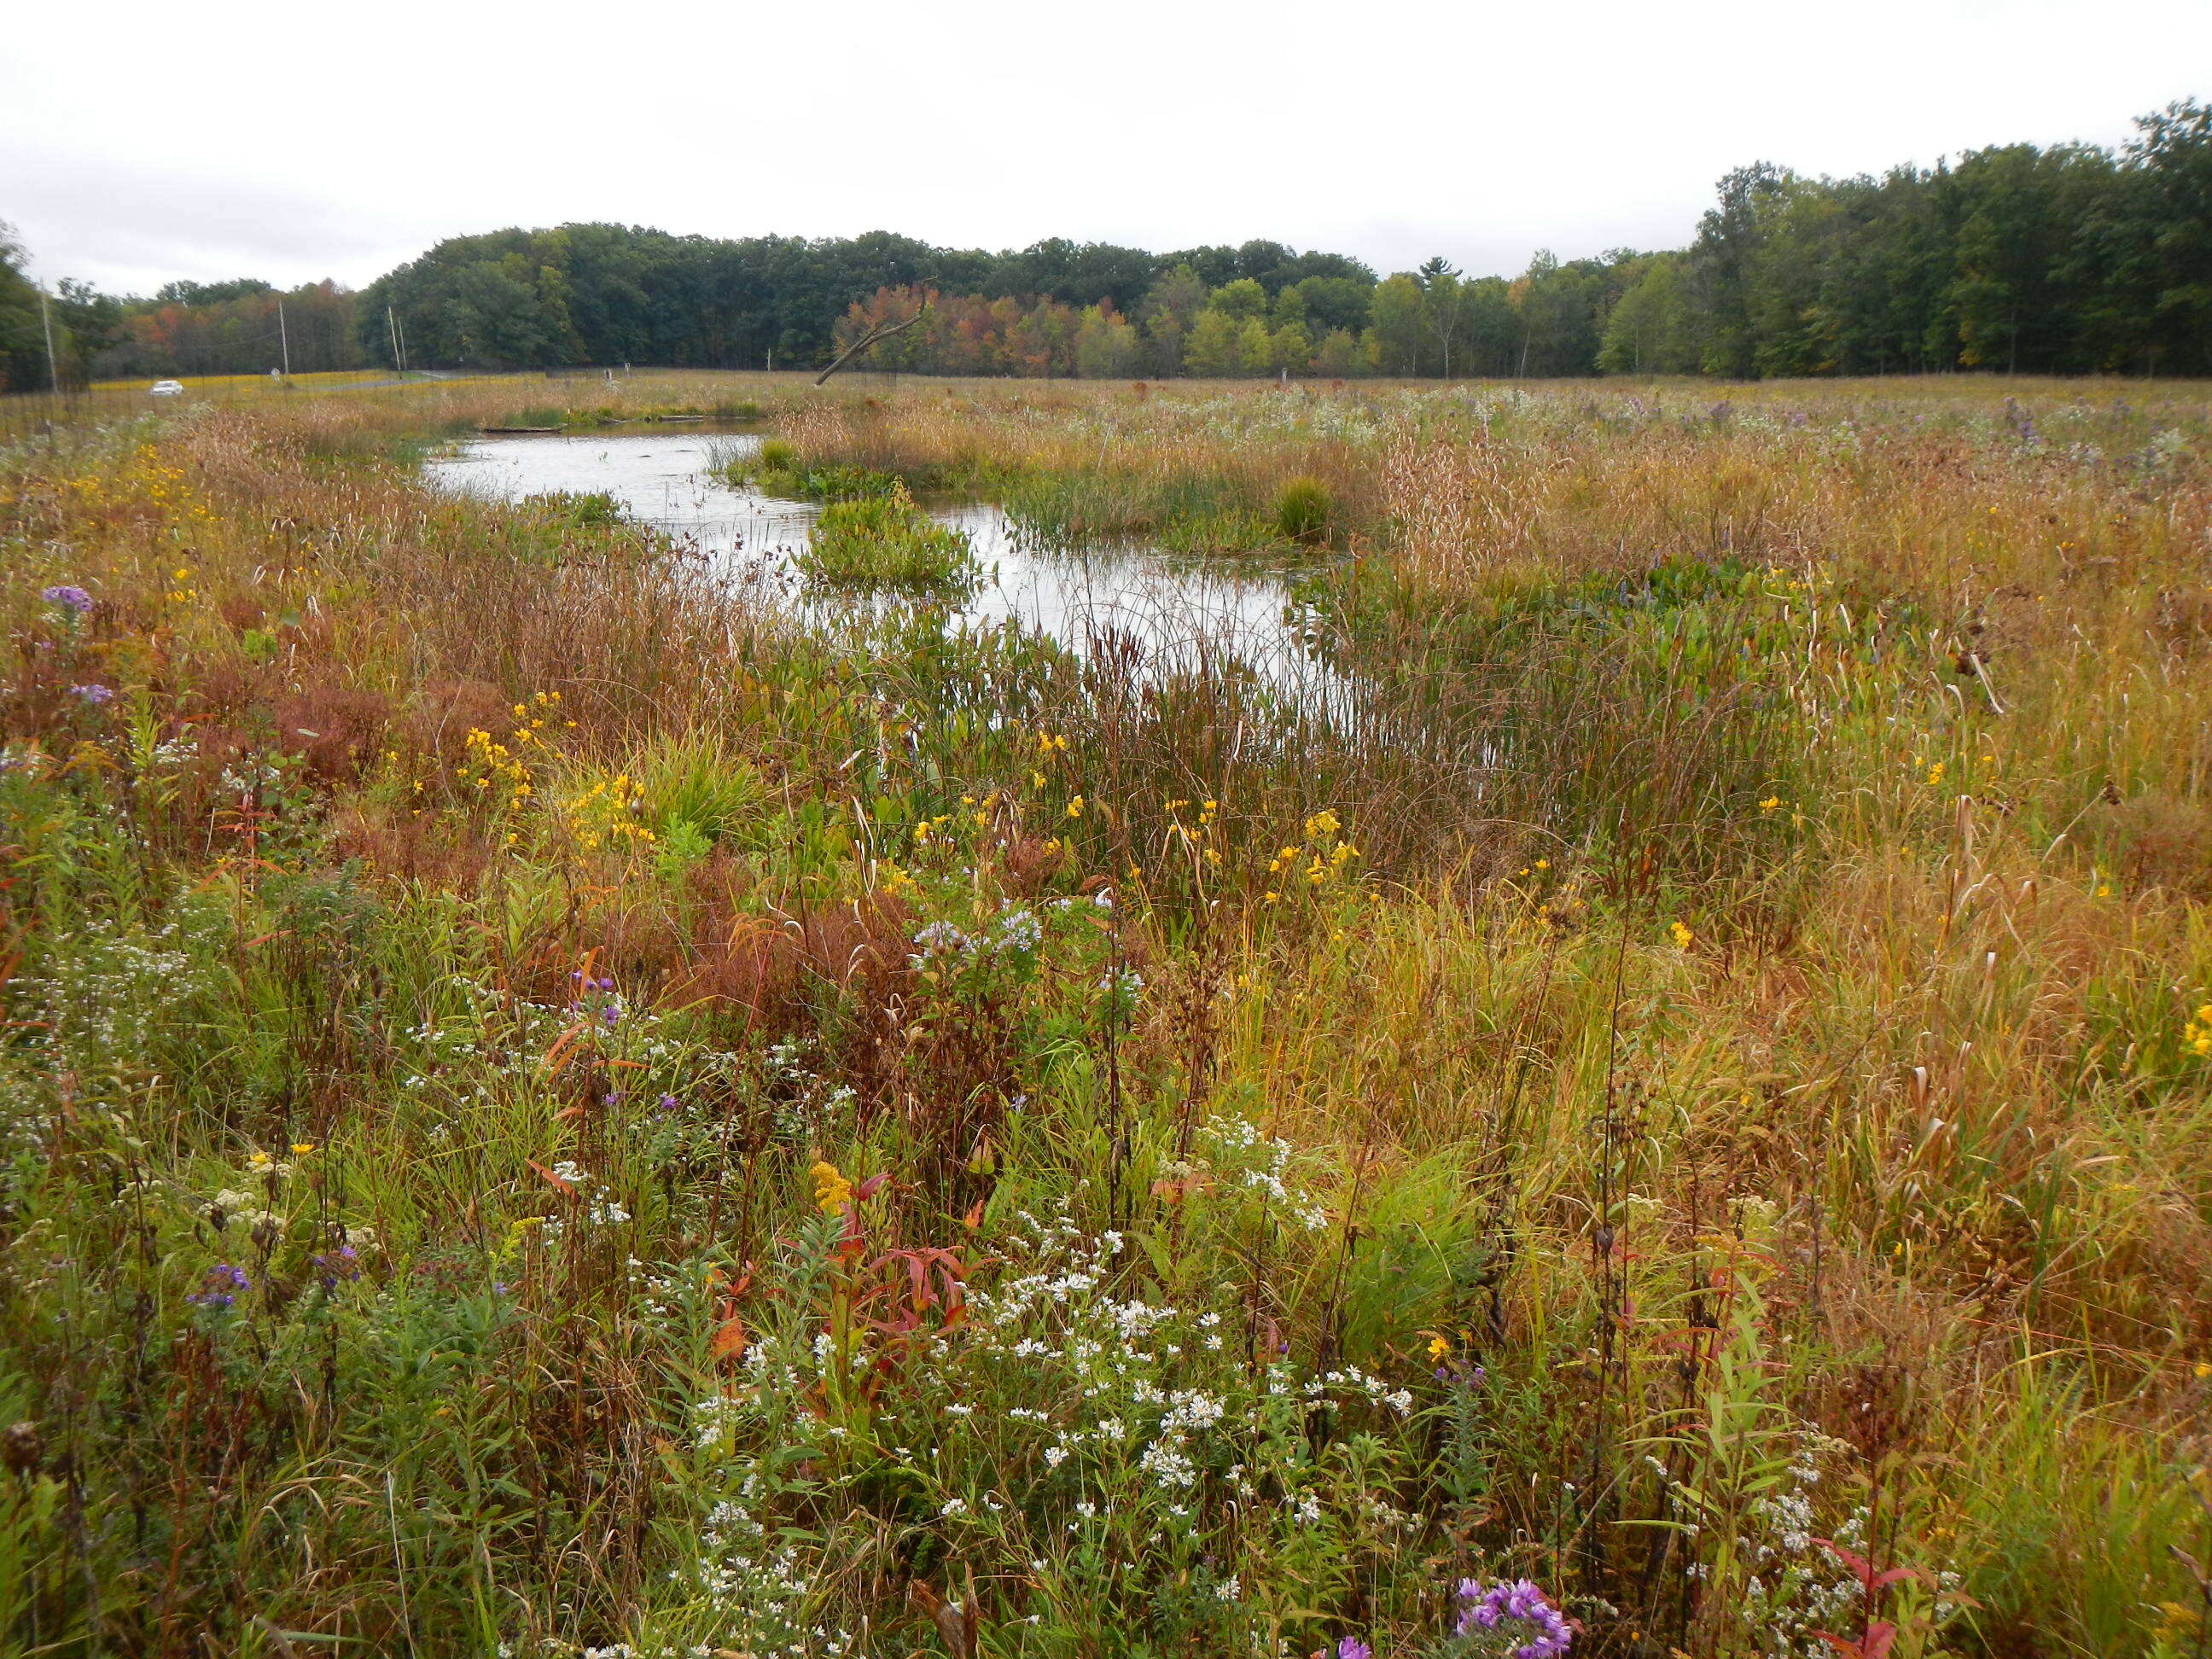 A meadow and wetland landscape. Purple, white and yellow flowers are in the foreground interspersed with tall grasses. In the middle is a winding pool with wetland plants. Forest borders the open area in the back and to the right.